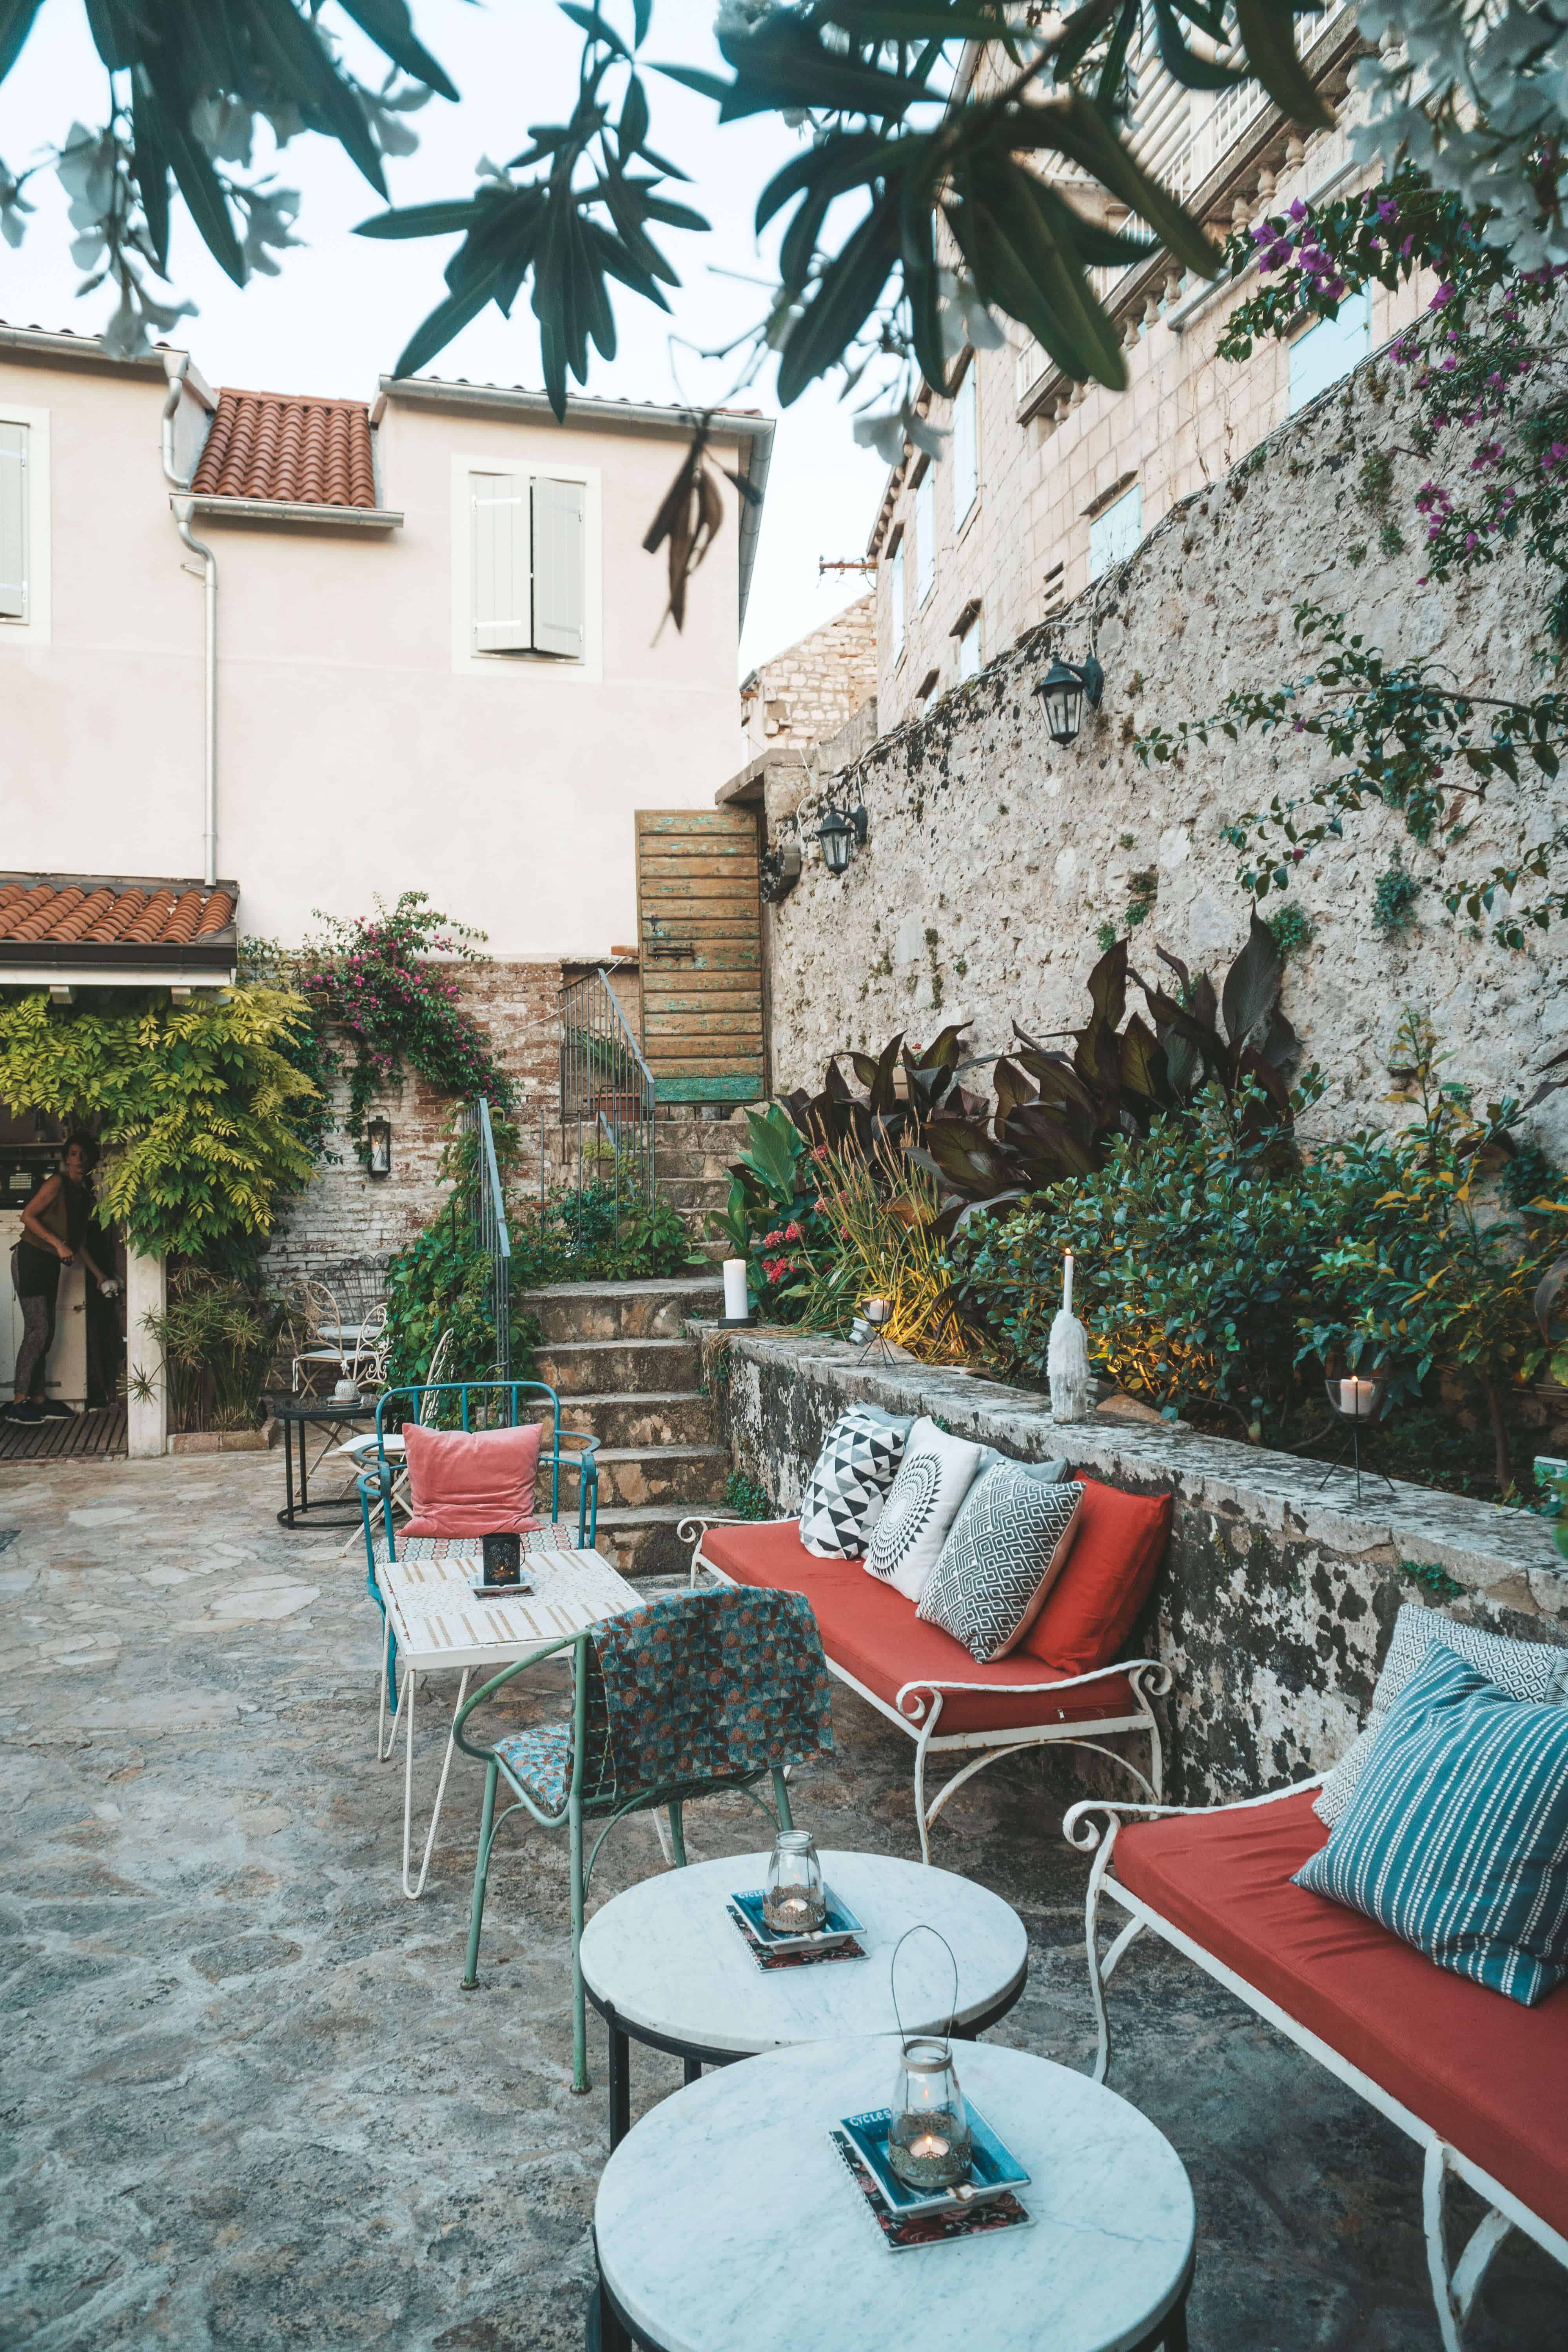 HOW TO SPEND ONE DAY IN VIS CROATIA | Lola Konoba | The Republic of Rose